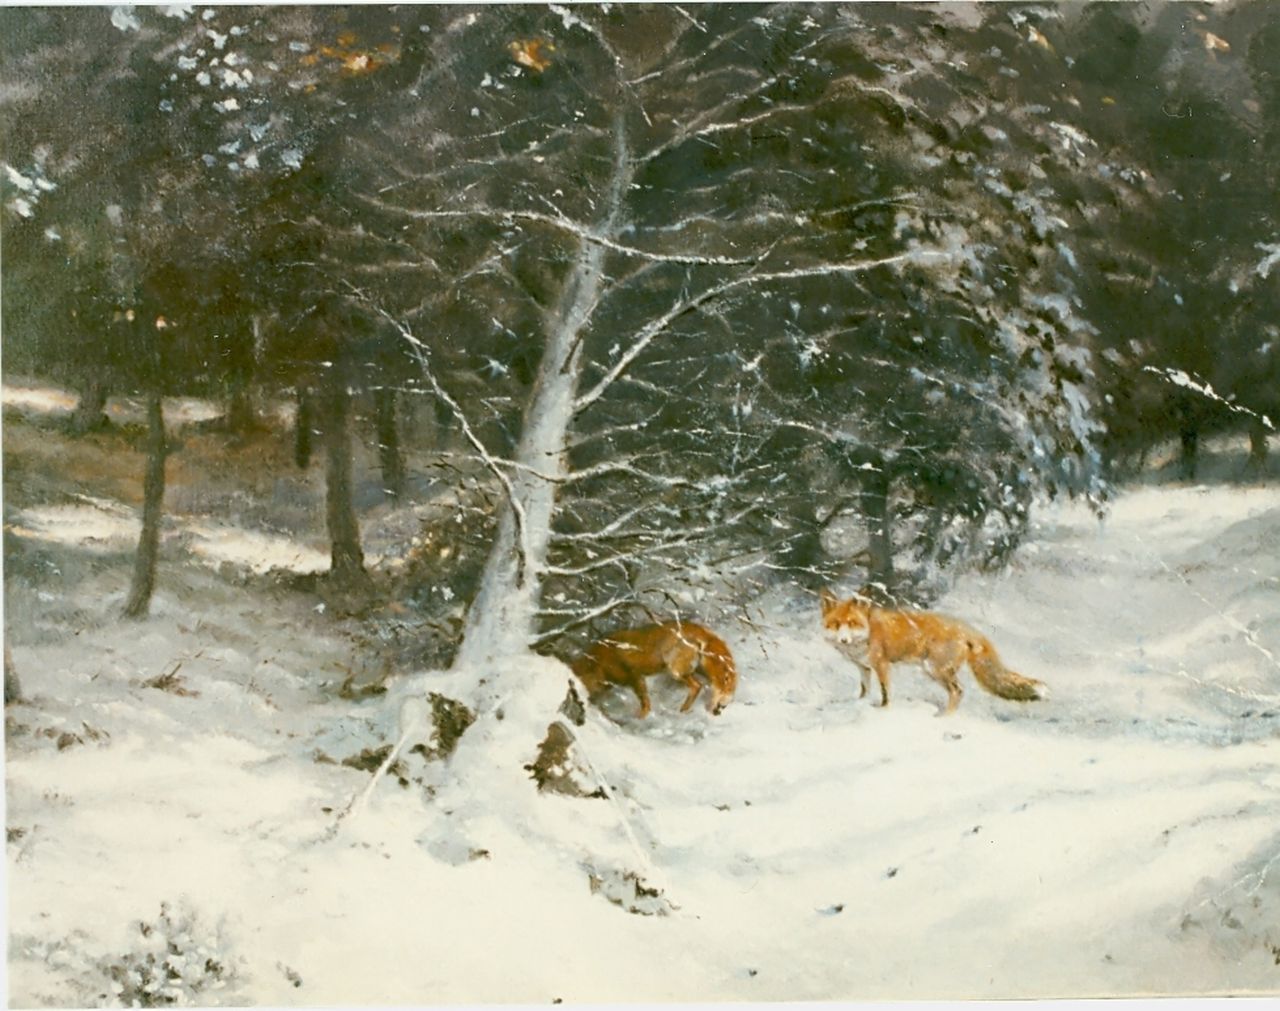 Poortvliet R.  | Rien Poortvliet, Foxes in a snow-covered landscape, Öl auf Leinwand 60,5 x 80,0 cm, signed l.r.